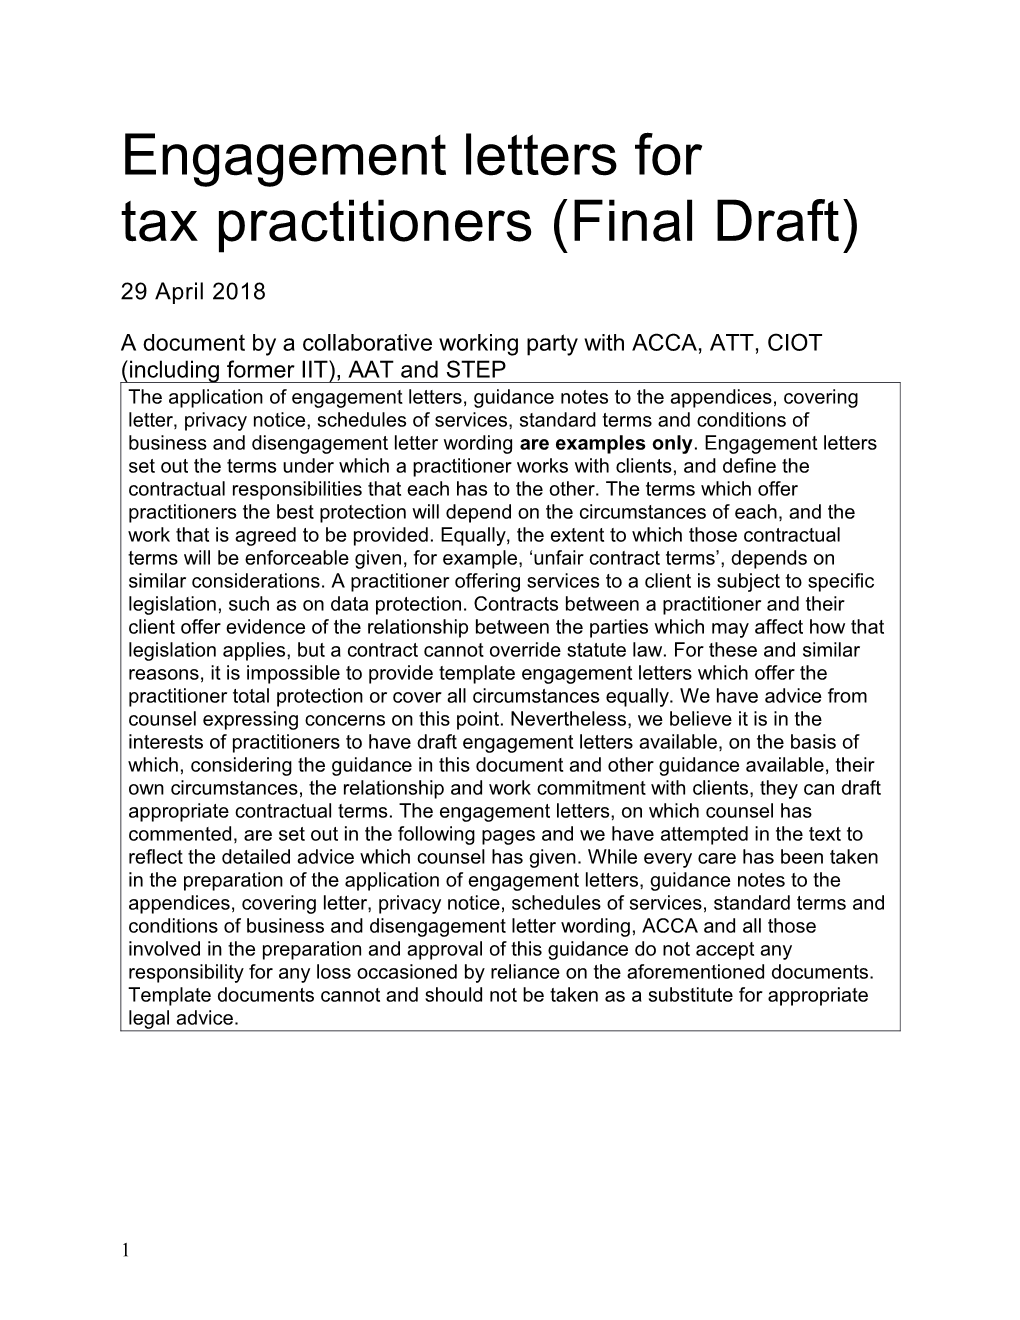 Engagement Letters for Tax Practitioners (Final Draft)